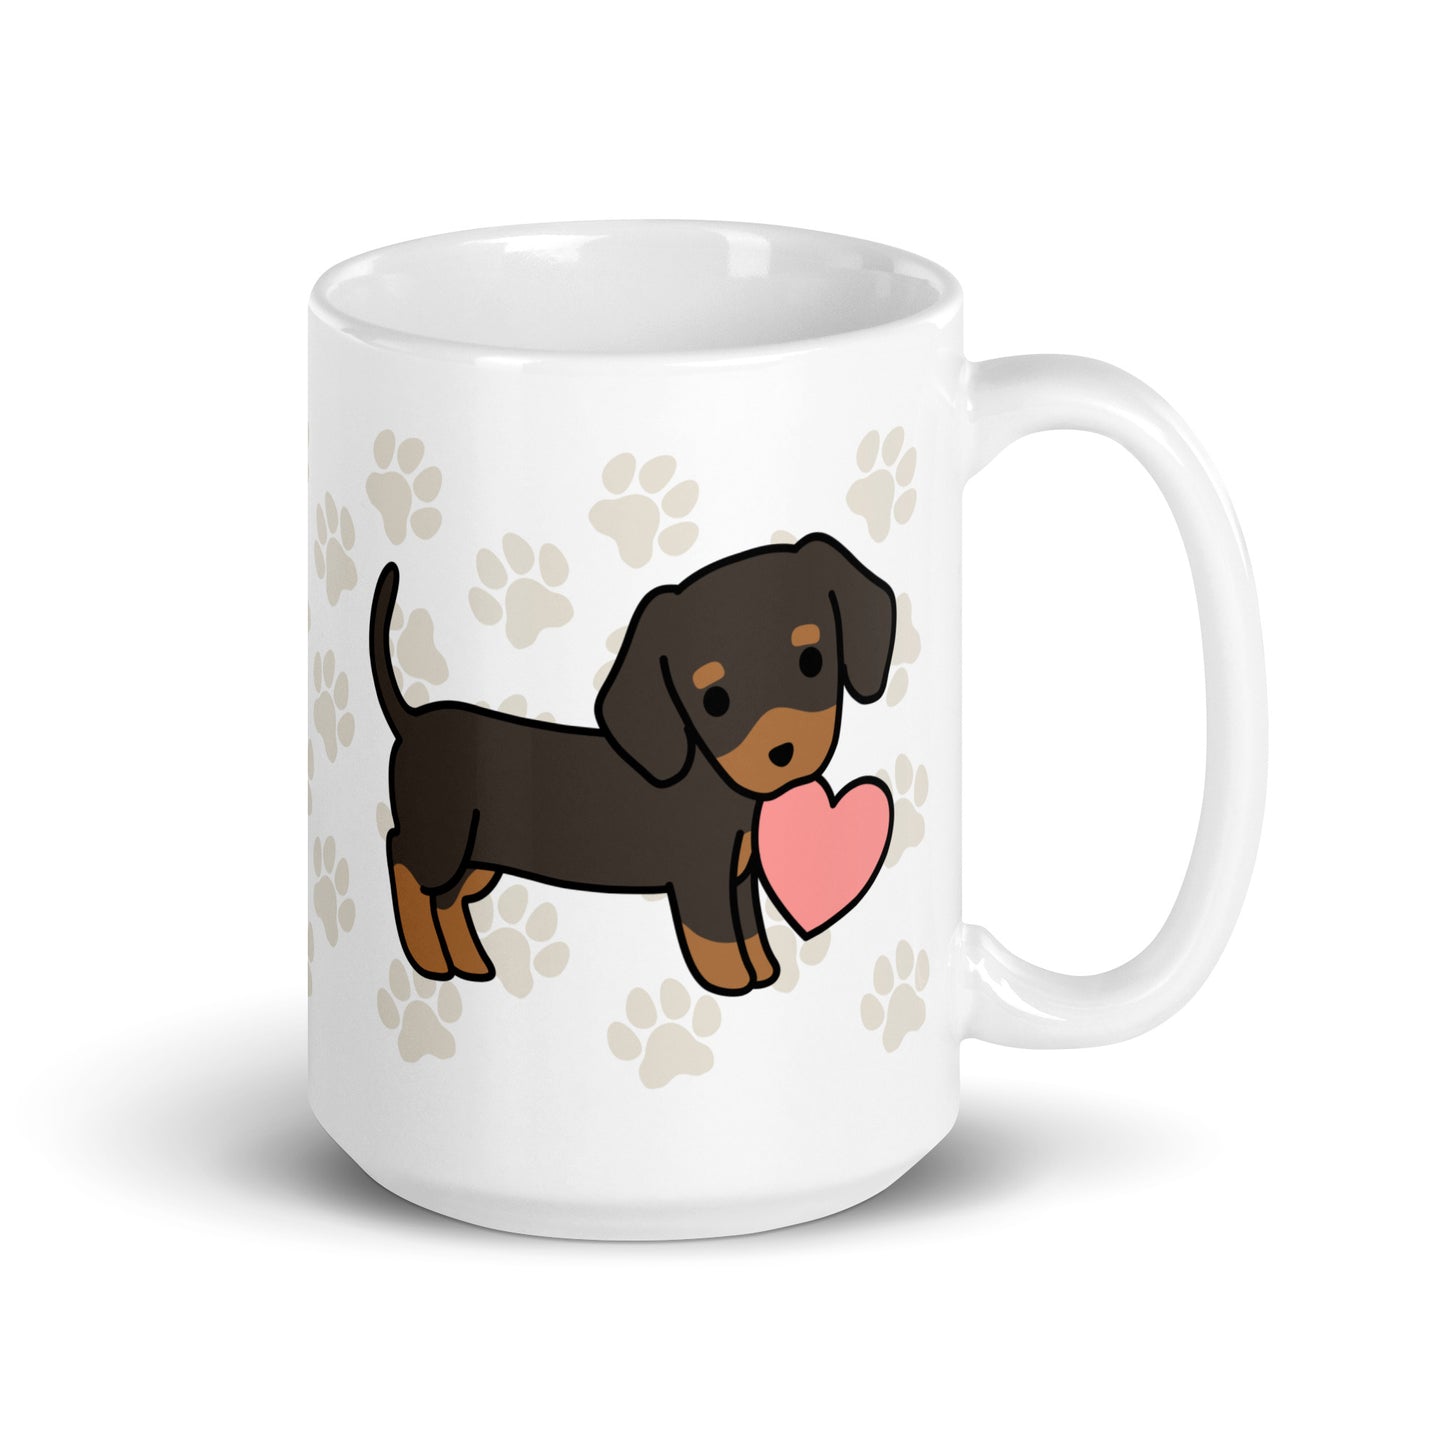 A white 15 ounce ceramic mug with a pattern of light brown pawprints all over. The mug also features a stylized illustration of a Dachshund holding a heart in its mouth.